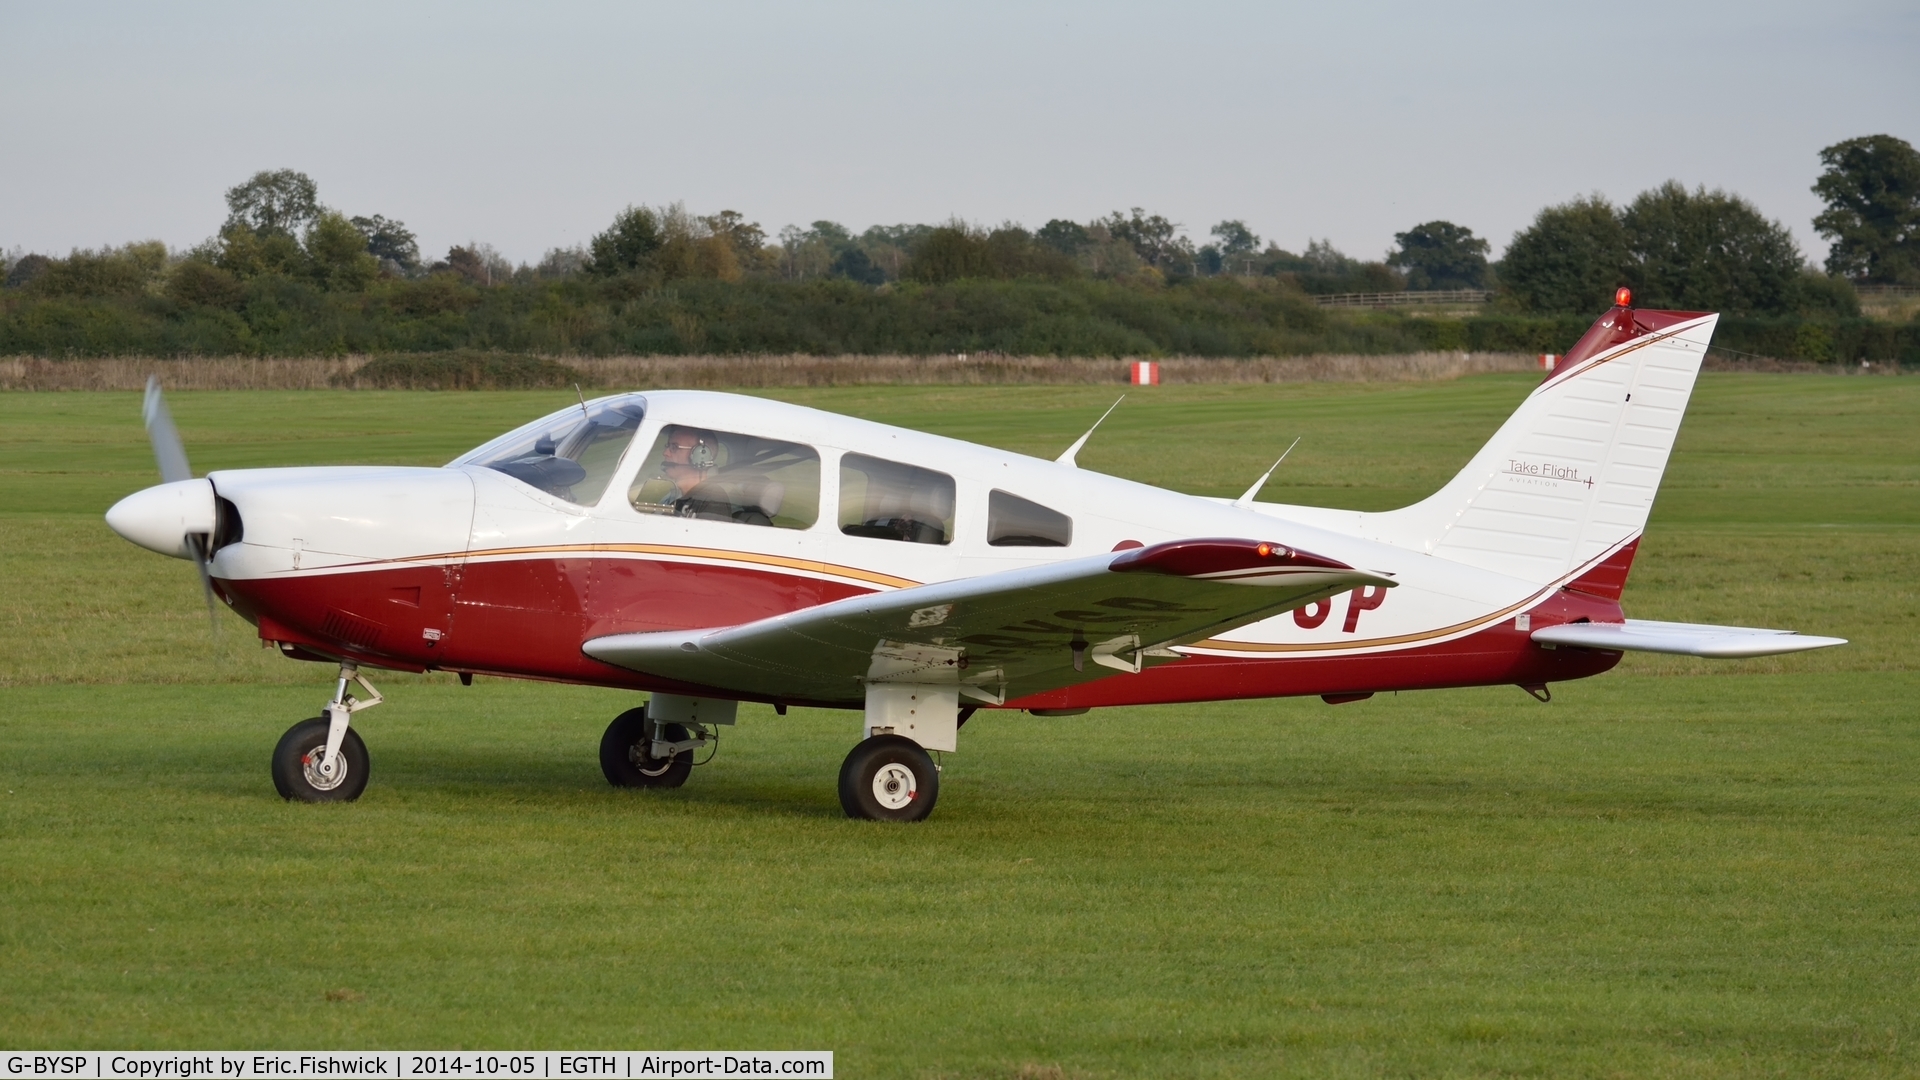 G-BYSP, 1985 Piper PA-28-181 Cherokee Archer II C/N 28-8590047, 1. G-BYSP preparing to depart the rousing season finale Race Day Air Show at Shuttleworth, Oct. 2014